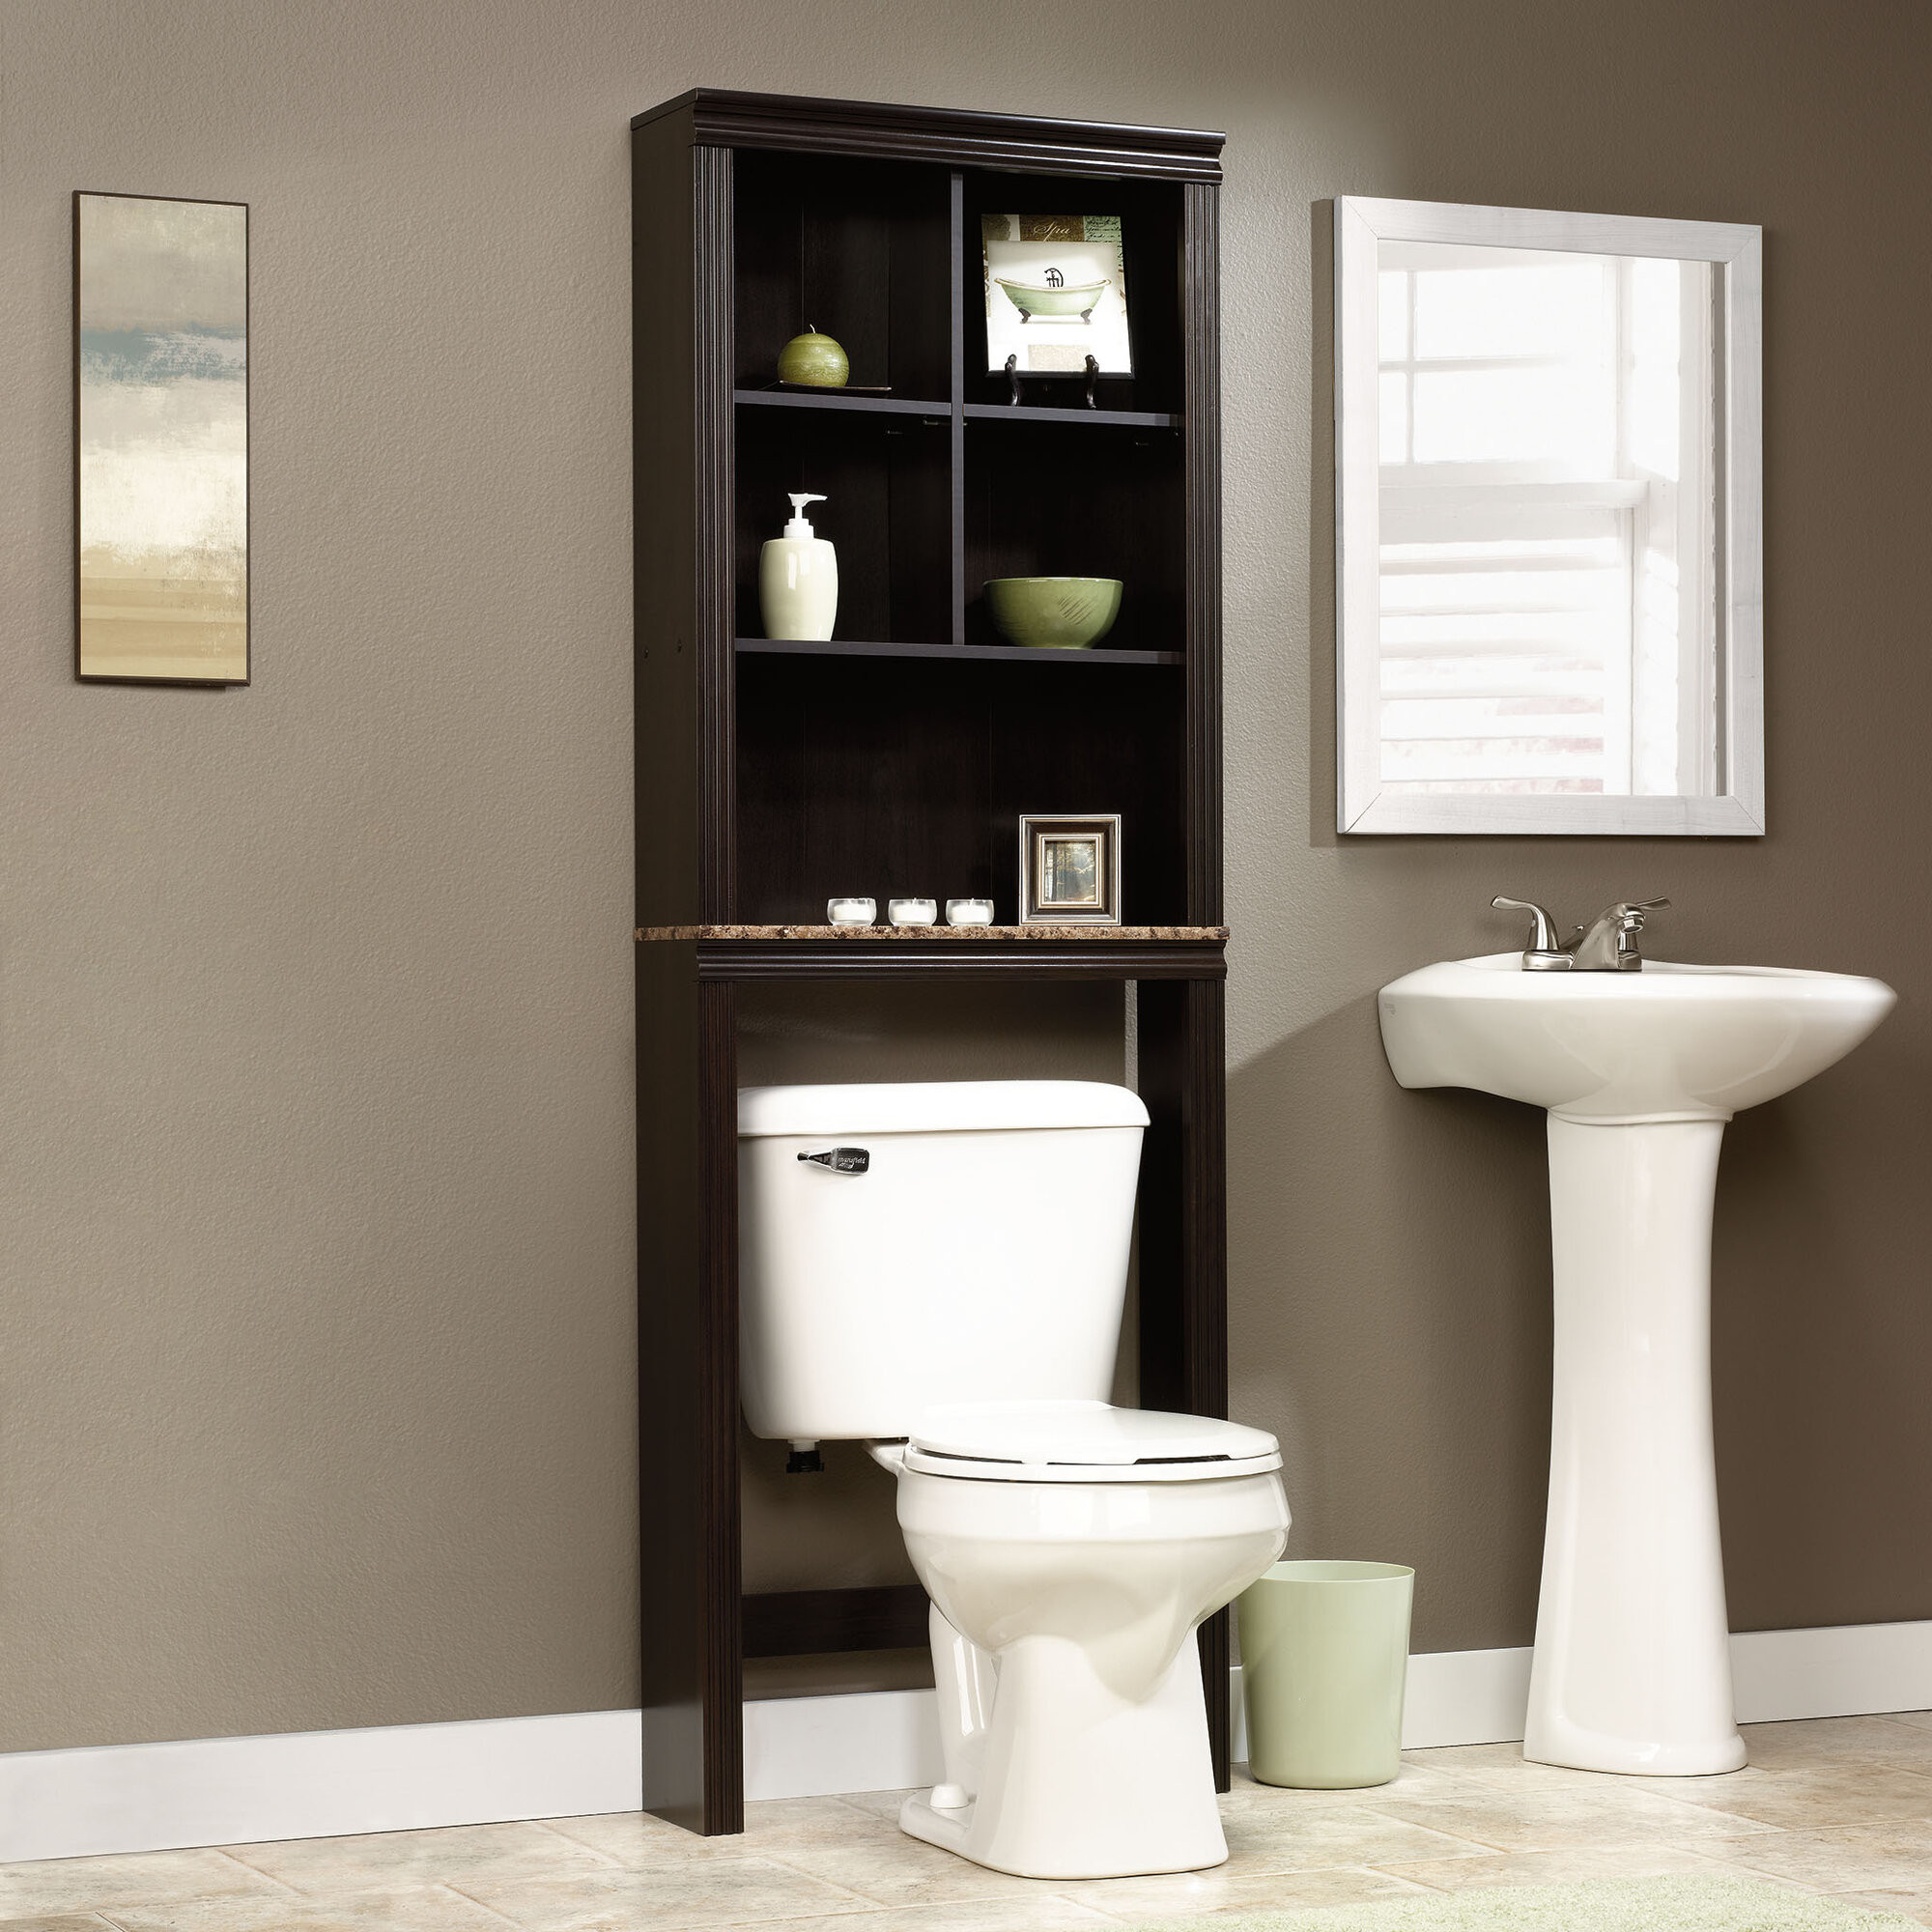 Over The Bathroom Storage
 Over The Toilet Storage Bathroom Space Saver Cubby